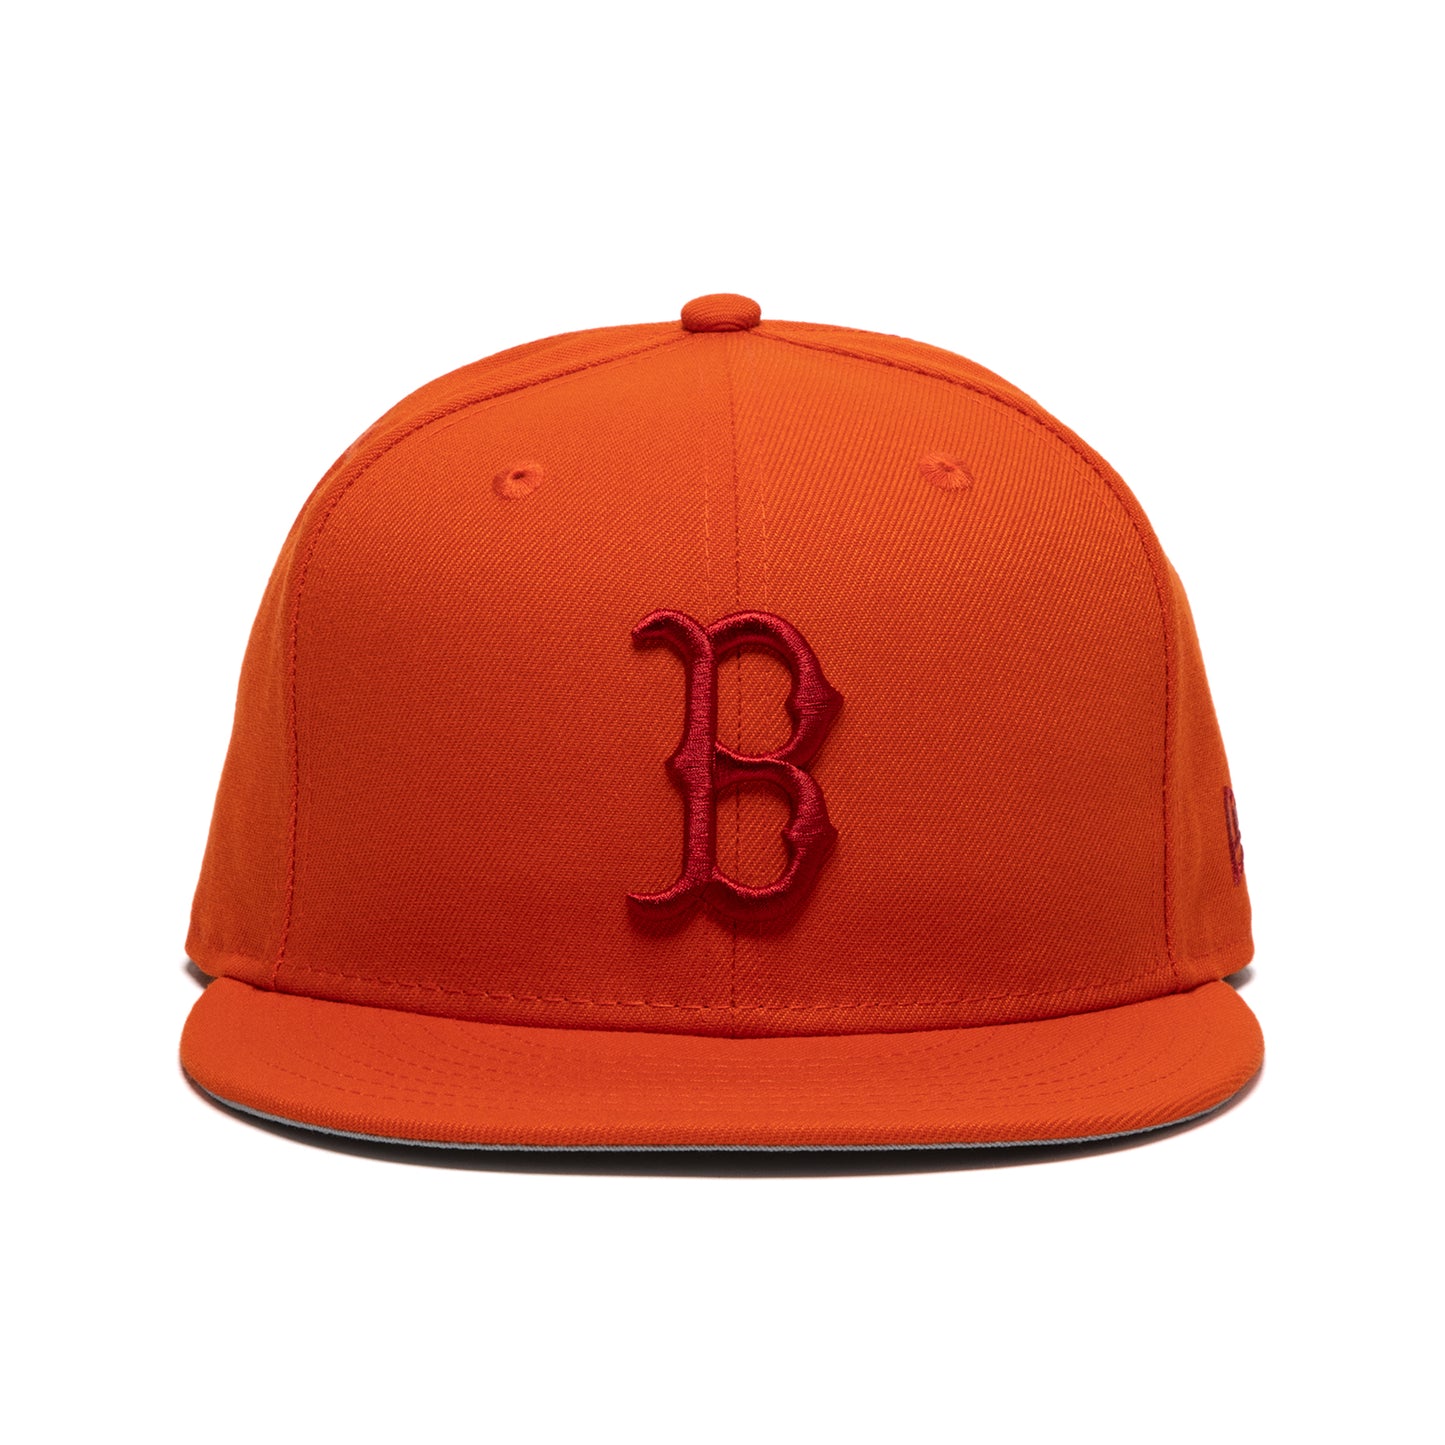 Concepts x New Era 59Fifty Boston Red Sox Fitted Hat (Orange/Grey)